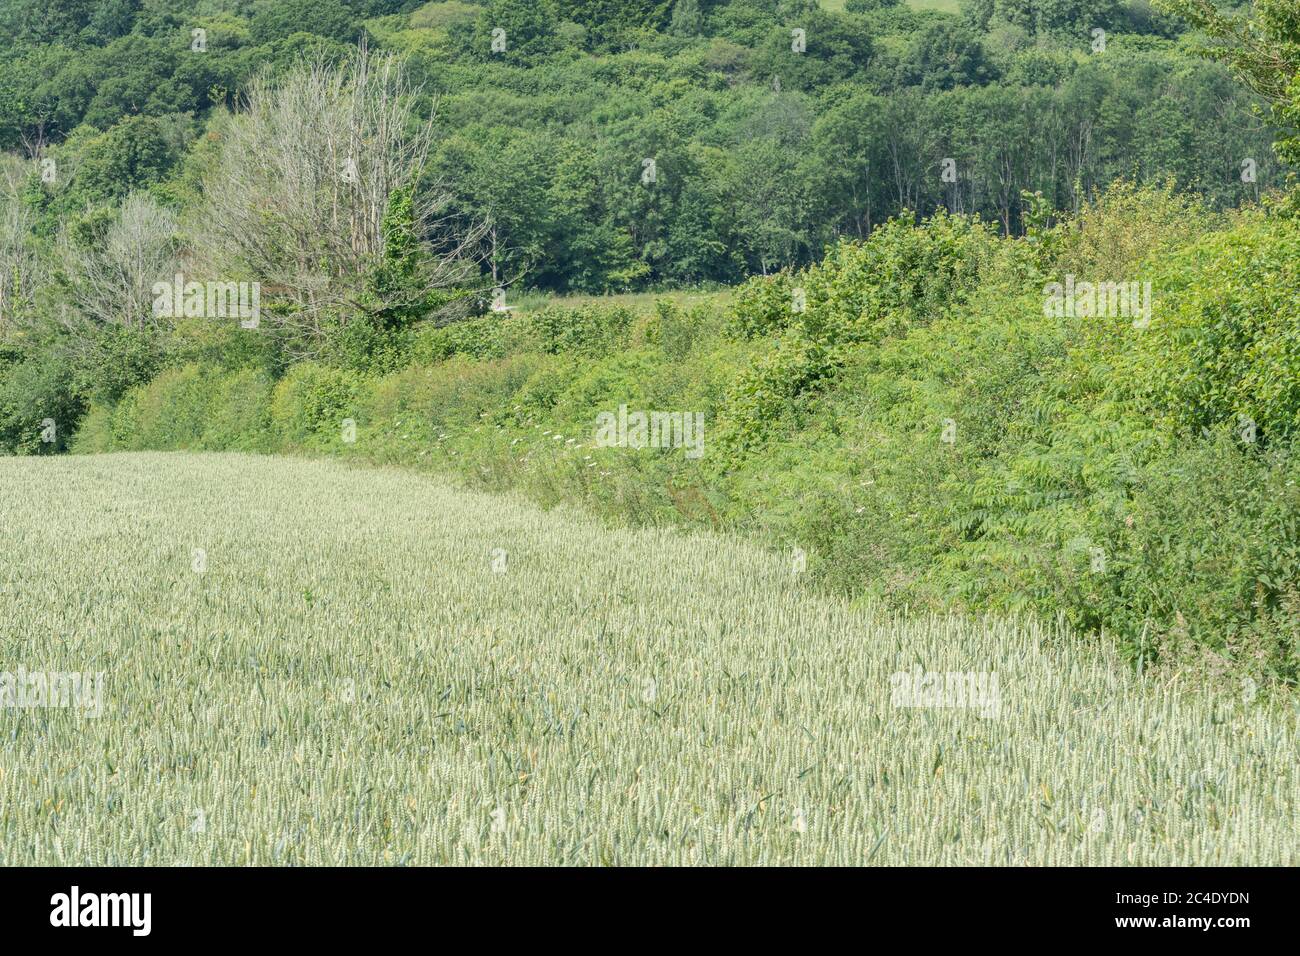 Hedgeline / boundary line of green UK wheat field. Metaphor farming & agriculture UK, boundaries, hedge lines, UK food supply, wheat crop 2020. Stock Photo